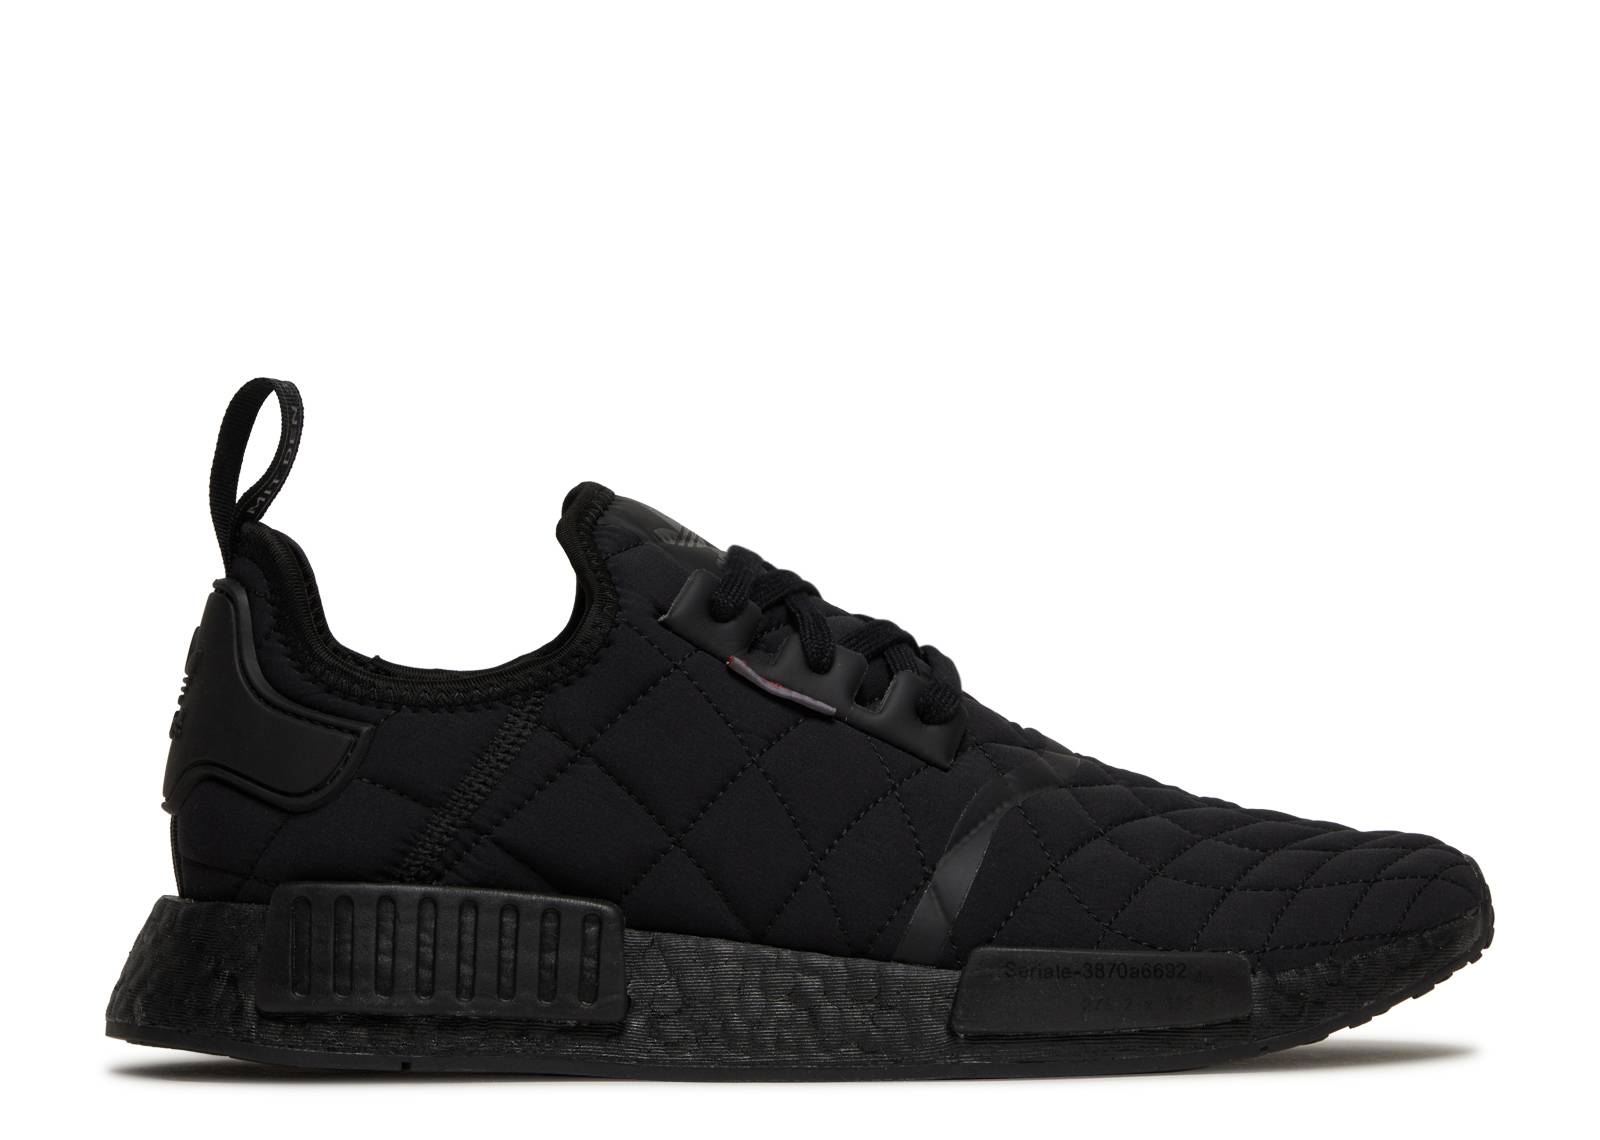 NMD_R1 'Quilted Black'